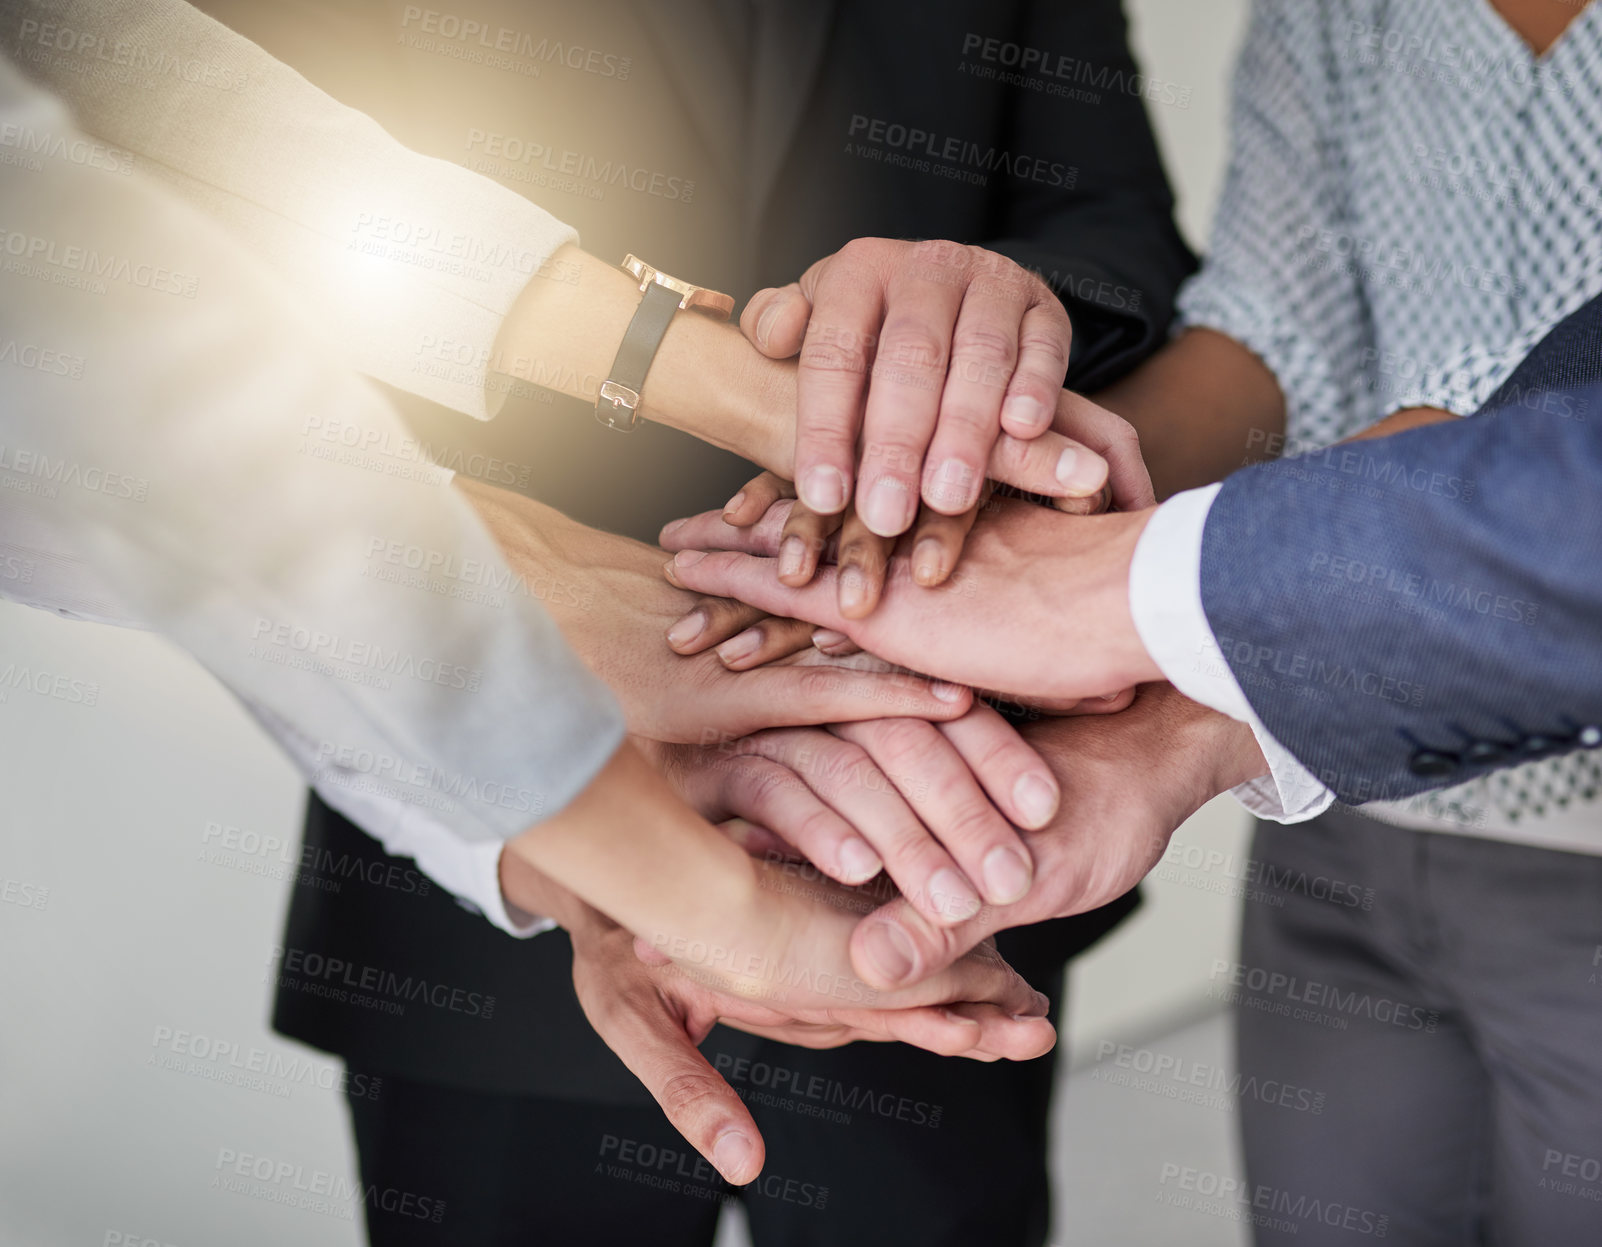 Buy stock photo Cropped shot of a group of colleagues joining hands in solidarity in a modern office